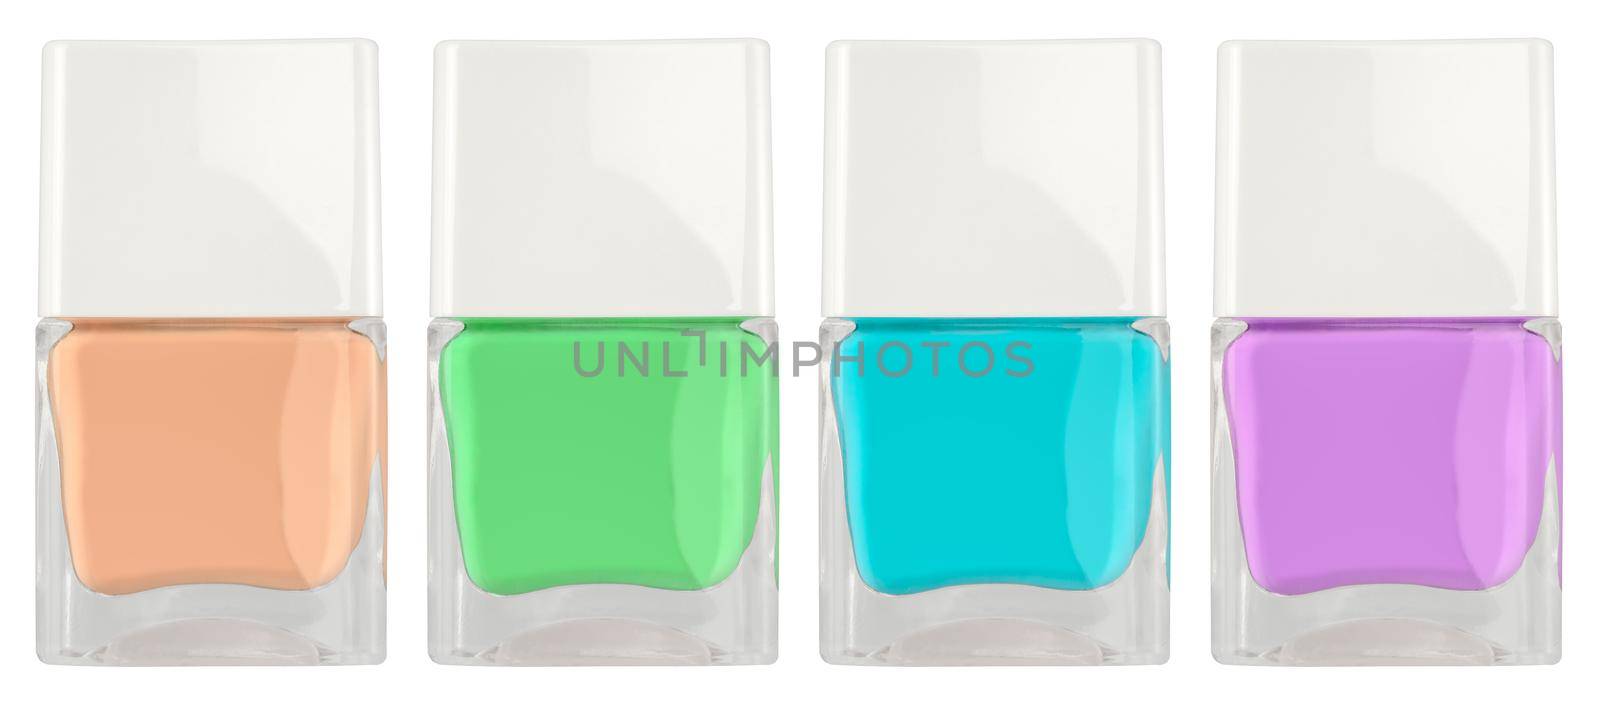 Multiple Colorful Bottles Of Nail Polish Isolated On A White Background